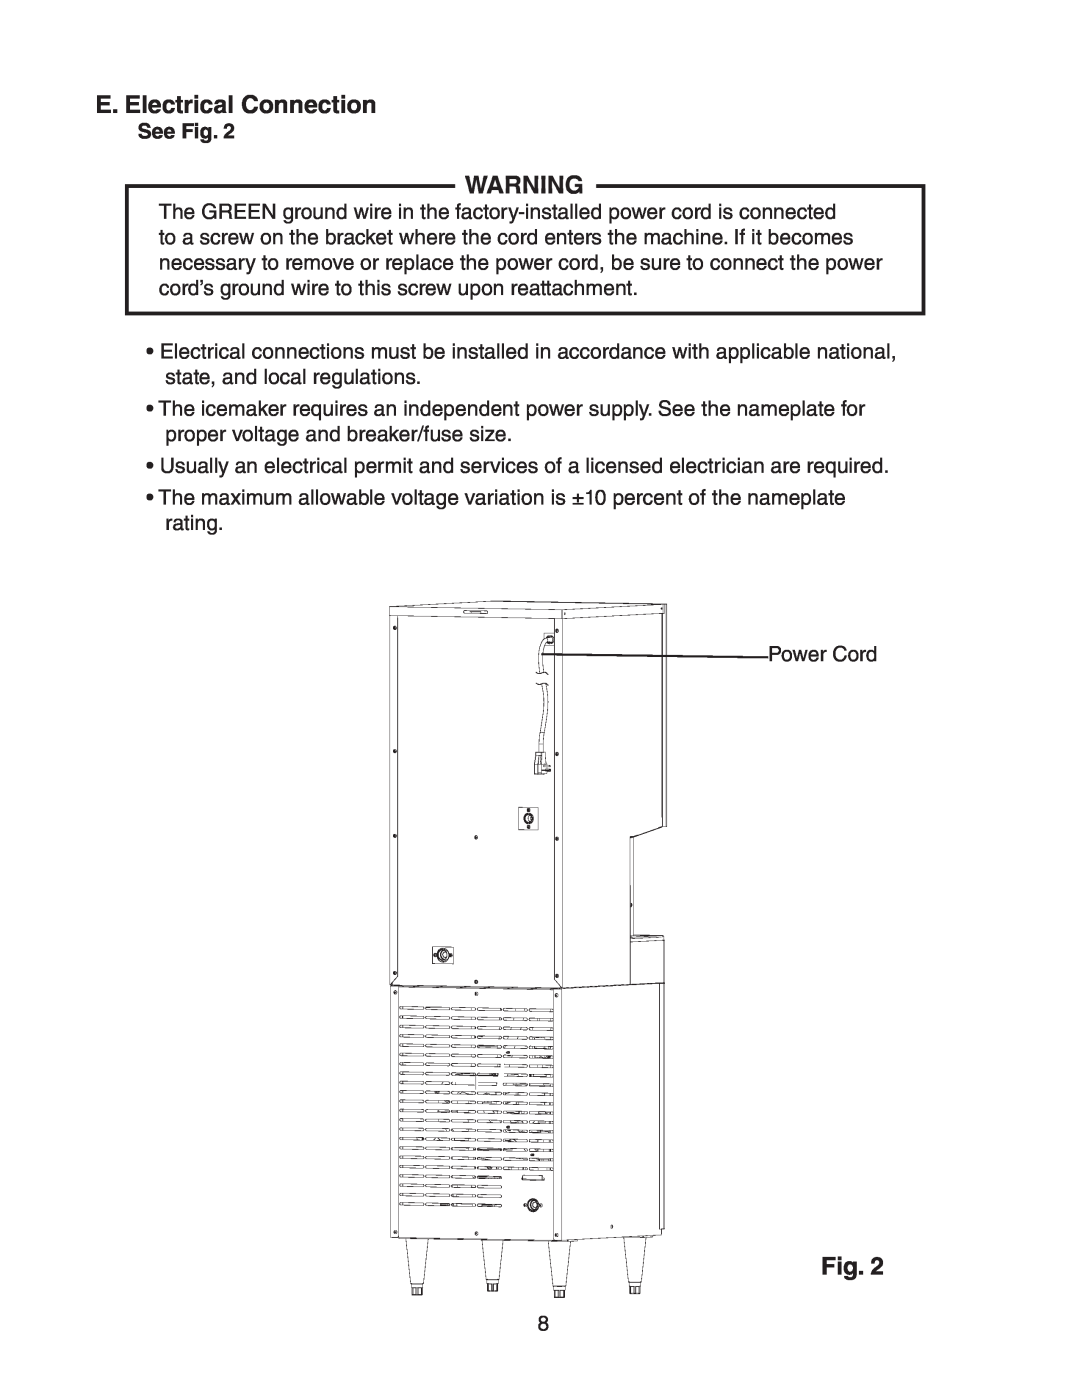 Hoshizaki DT-400BAH-OS instruction manual E. Electrical Connection, See Fig 